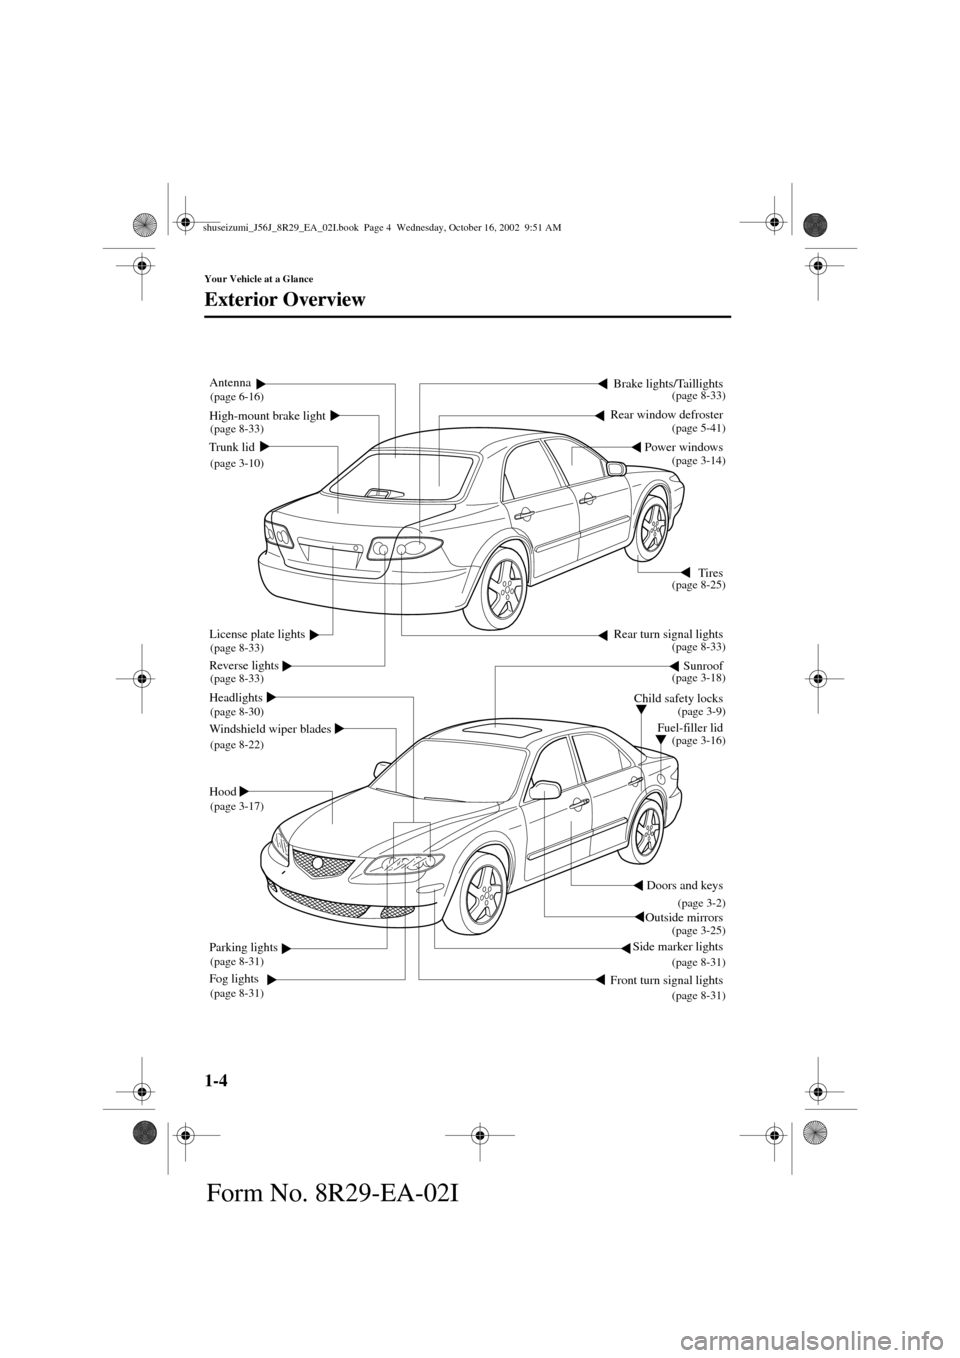 MAZDA MODEL 6 2003  Owners Manual (in English) 1-4
Your Vehicle at a Glance
Form No. 8R29-EA-02I
Exterior Overview
Doors and keys
Outside mirrors Headlights
Fuel-filler lid Child safety locksTires
Reverse lights
Windshield wiper blades
Hood
Front 